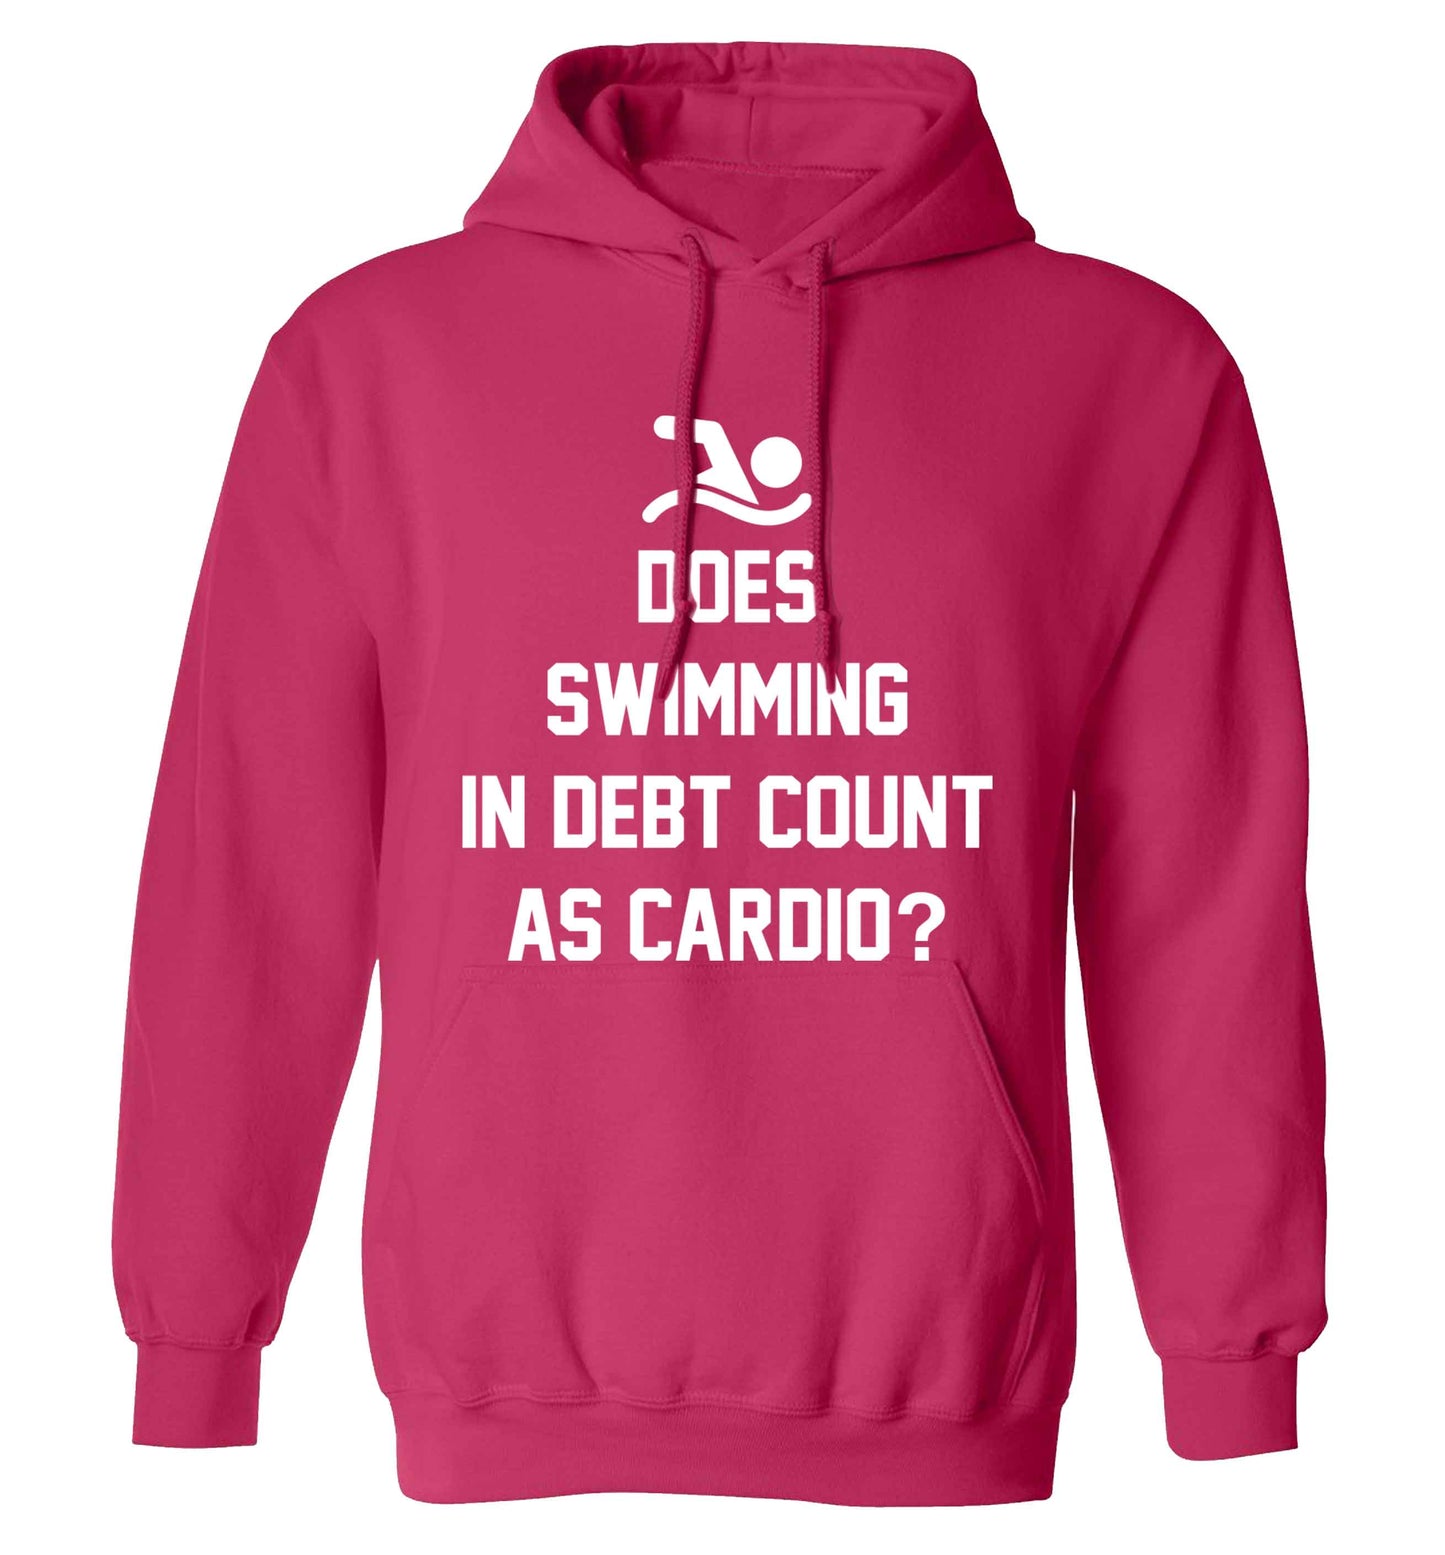 Does swimming in debt count as cardio? adults unisex pink hoodie 2XL